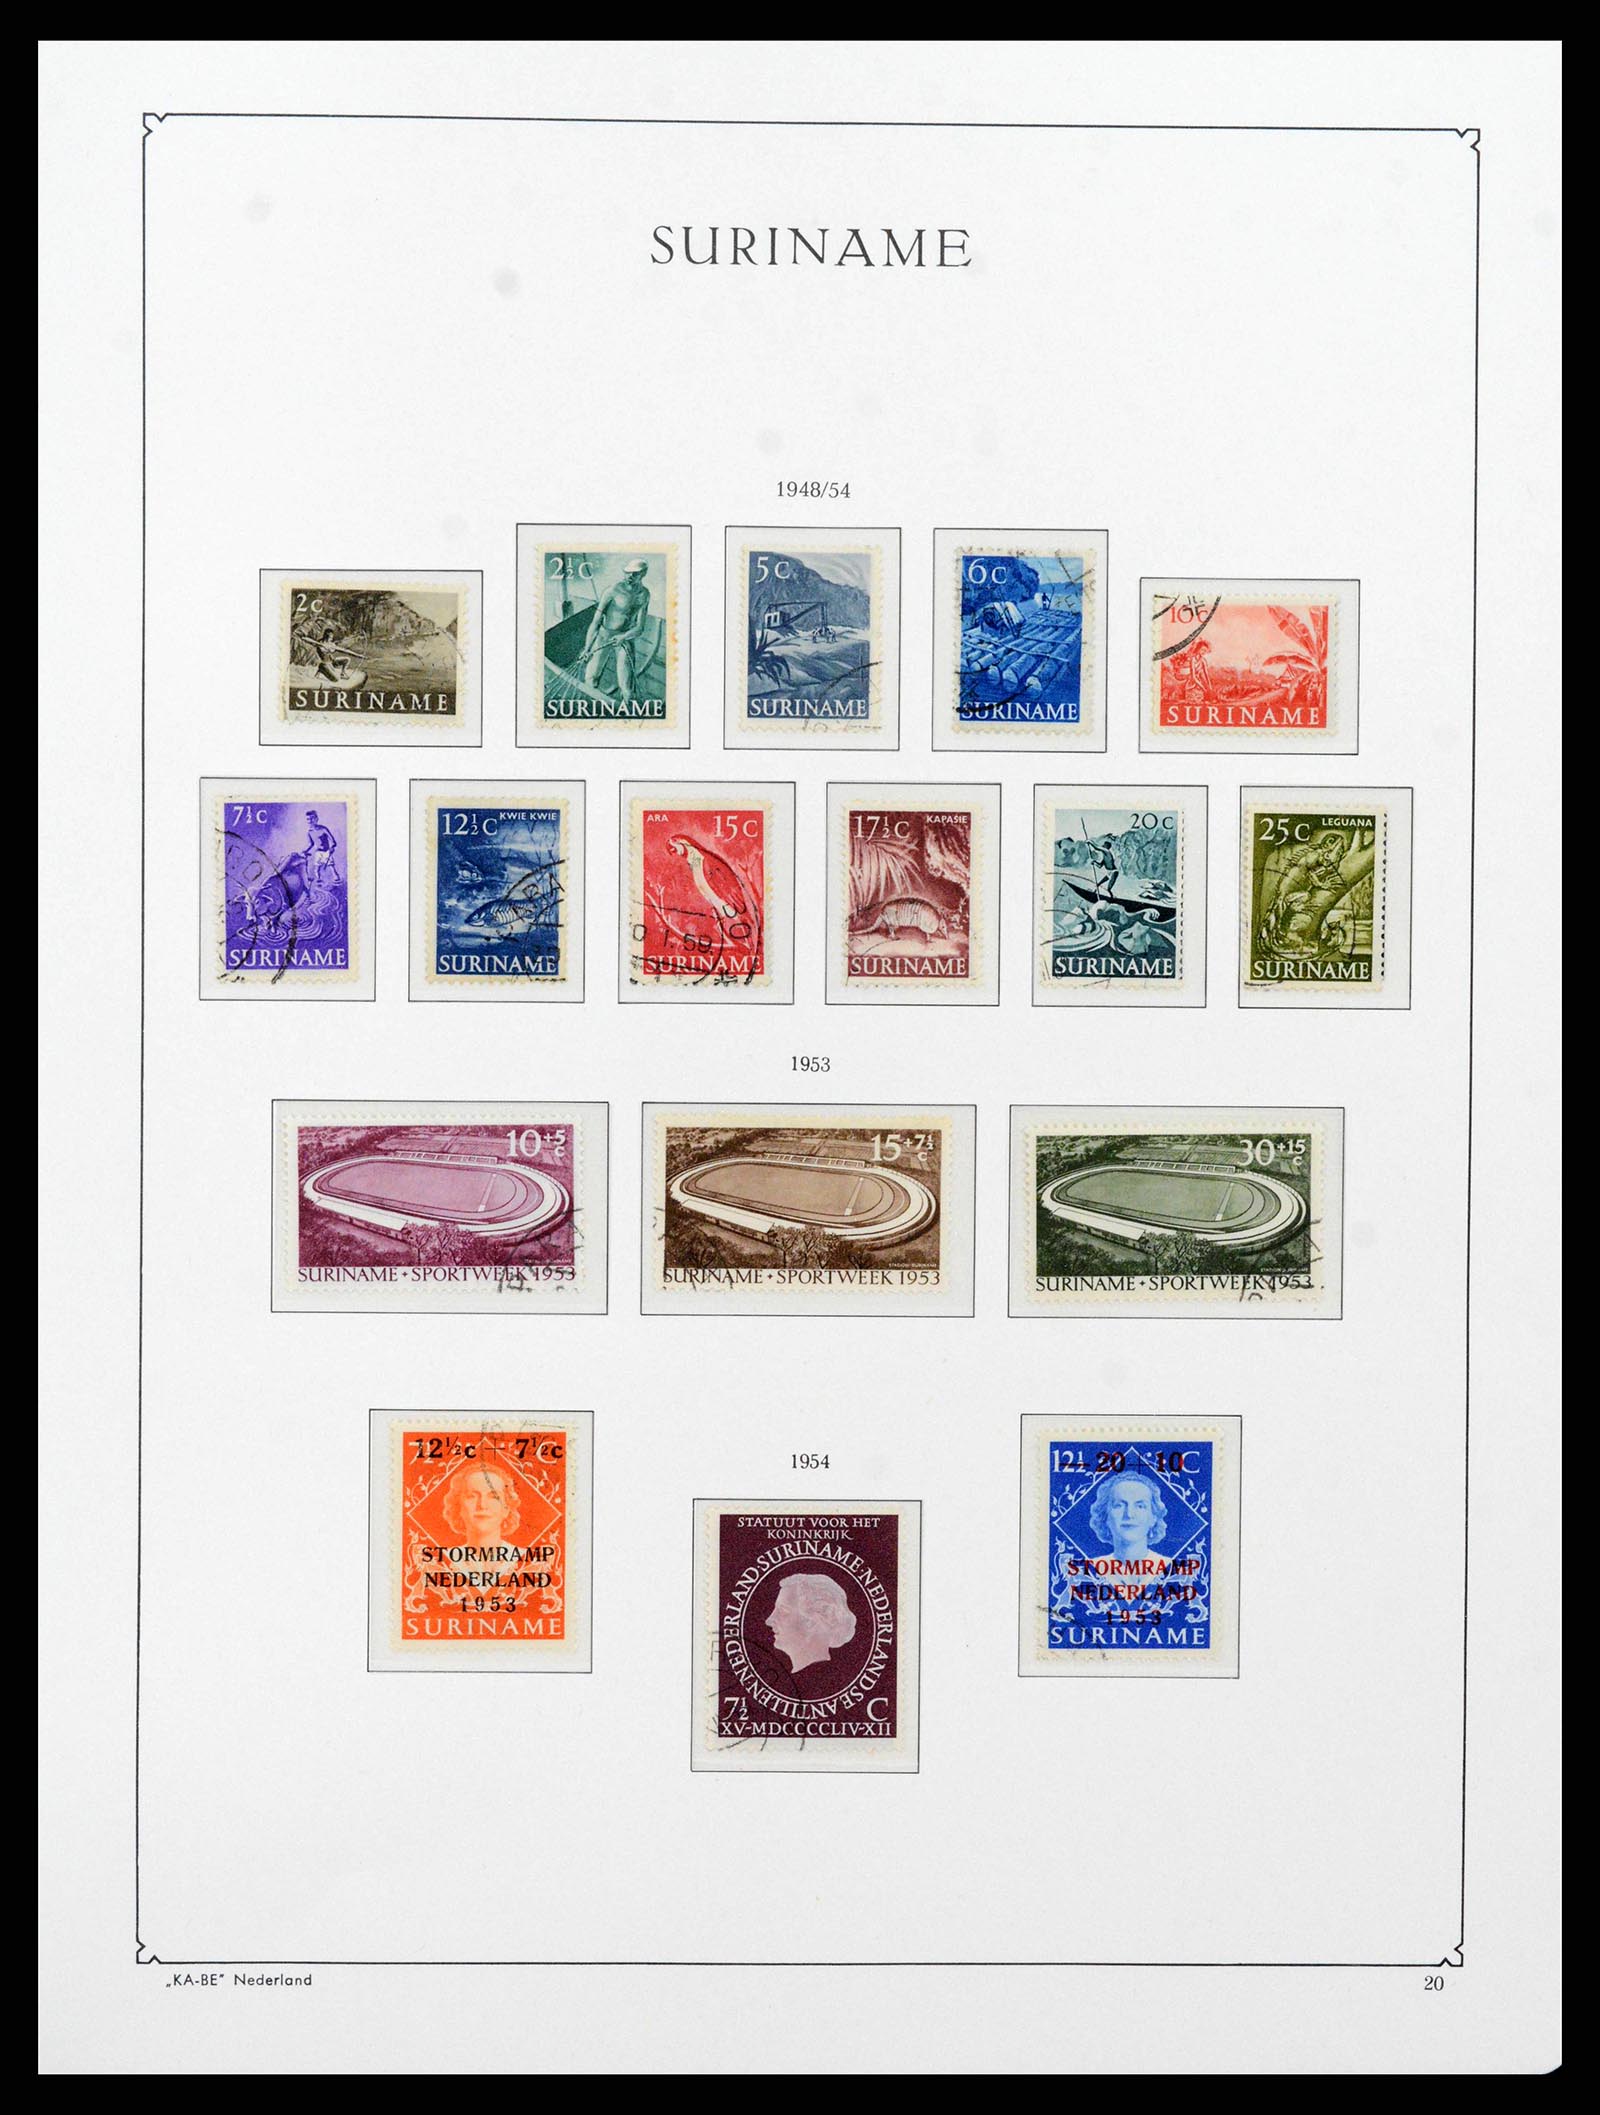 38465 0021 - Stamp collection 38465 Suriname 1873-1975.